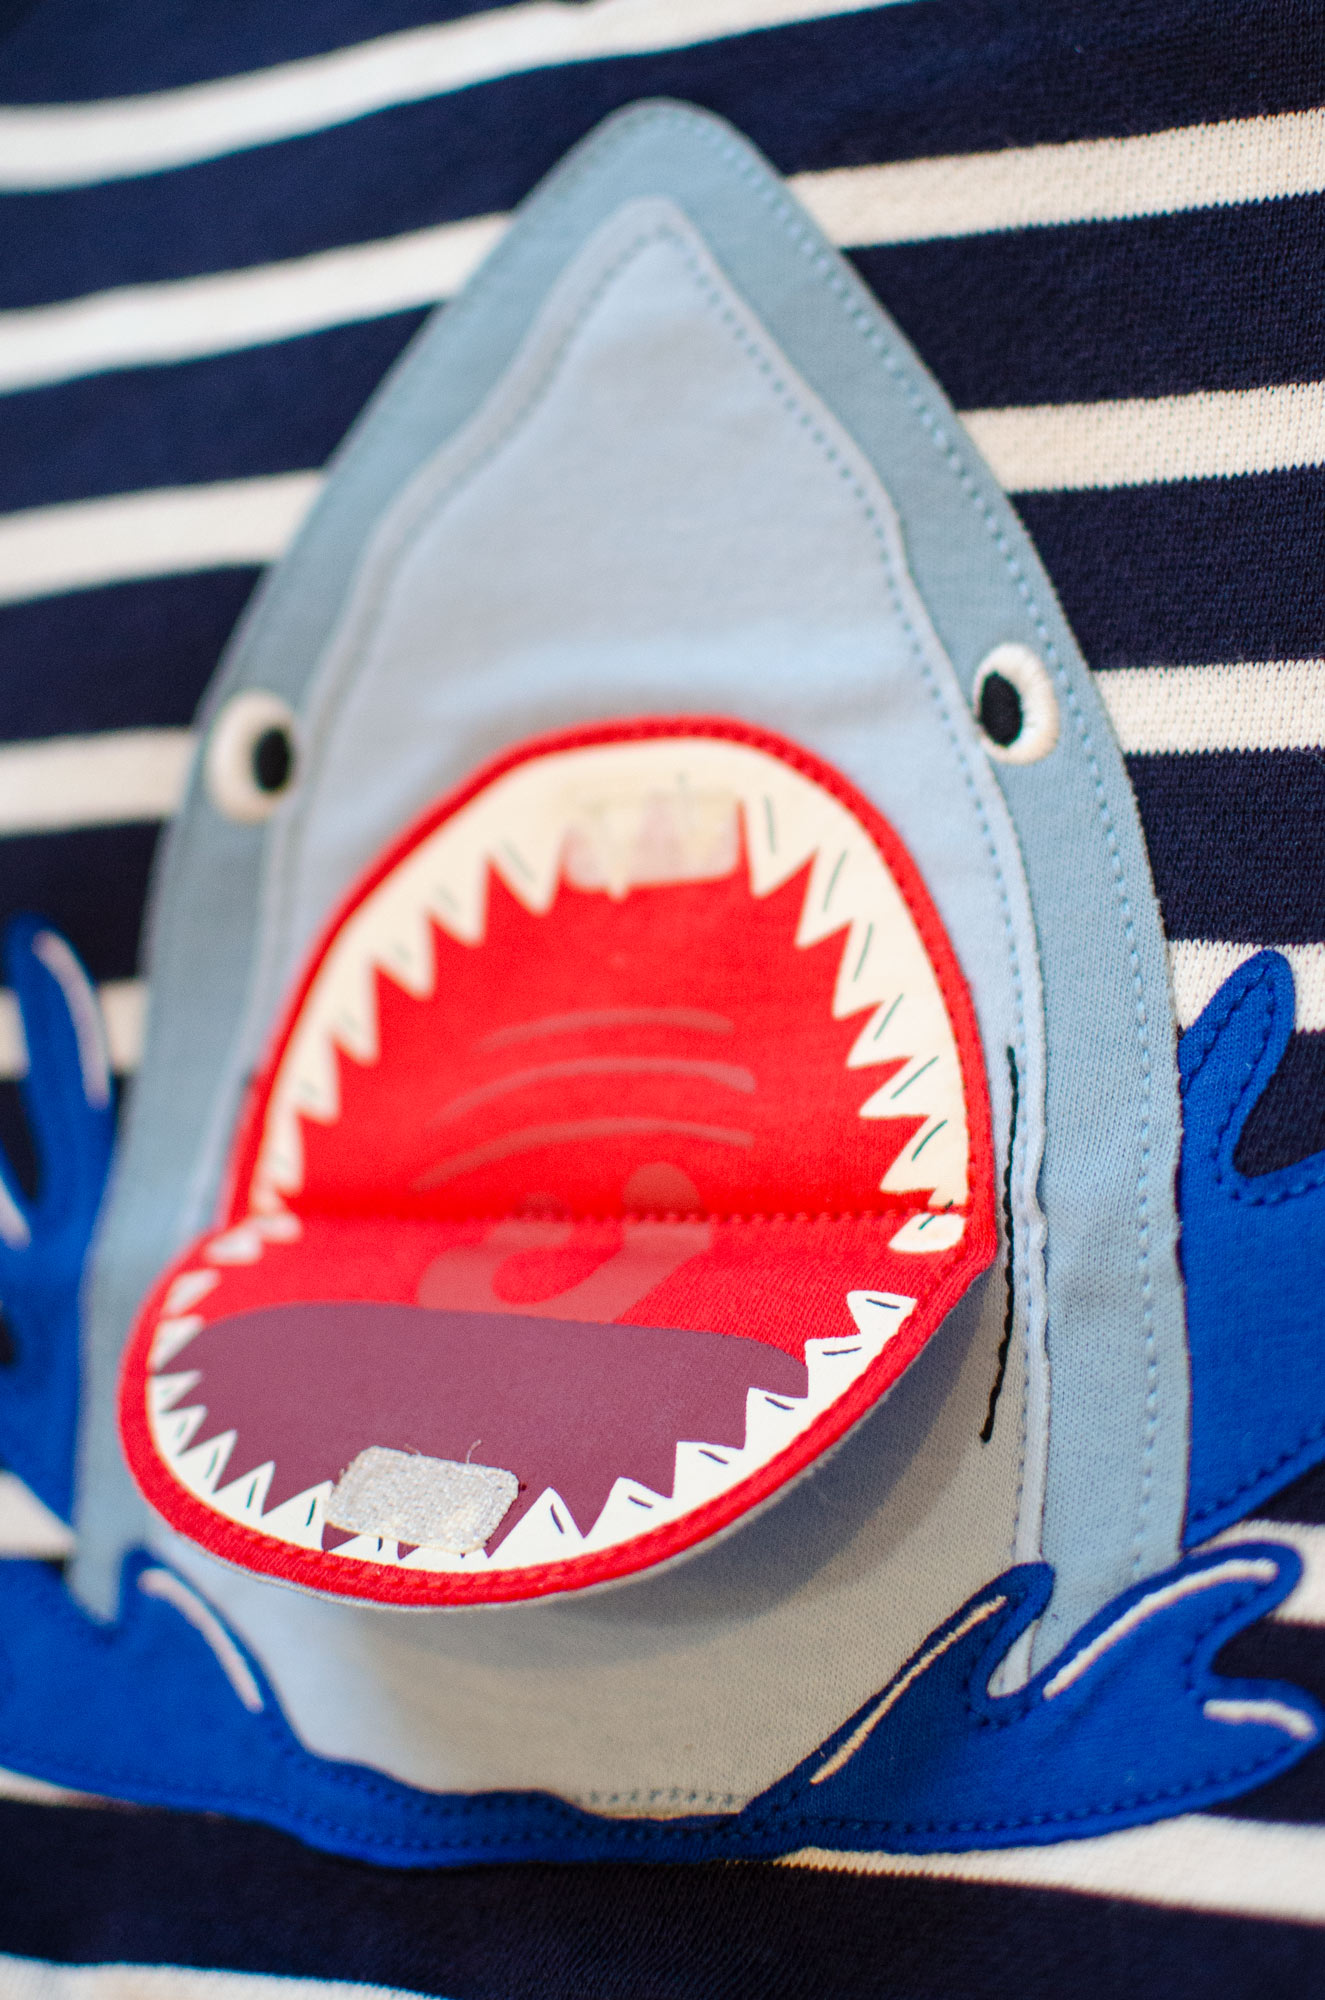 Detail of children's illustration of a shark for Joules by Elly Jahnz